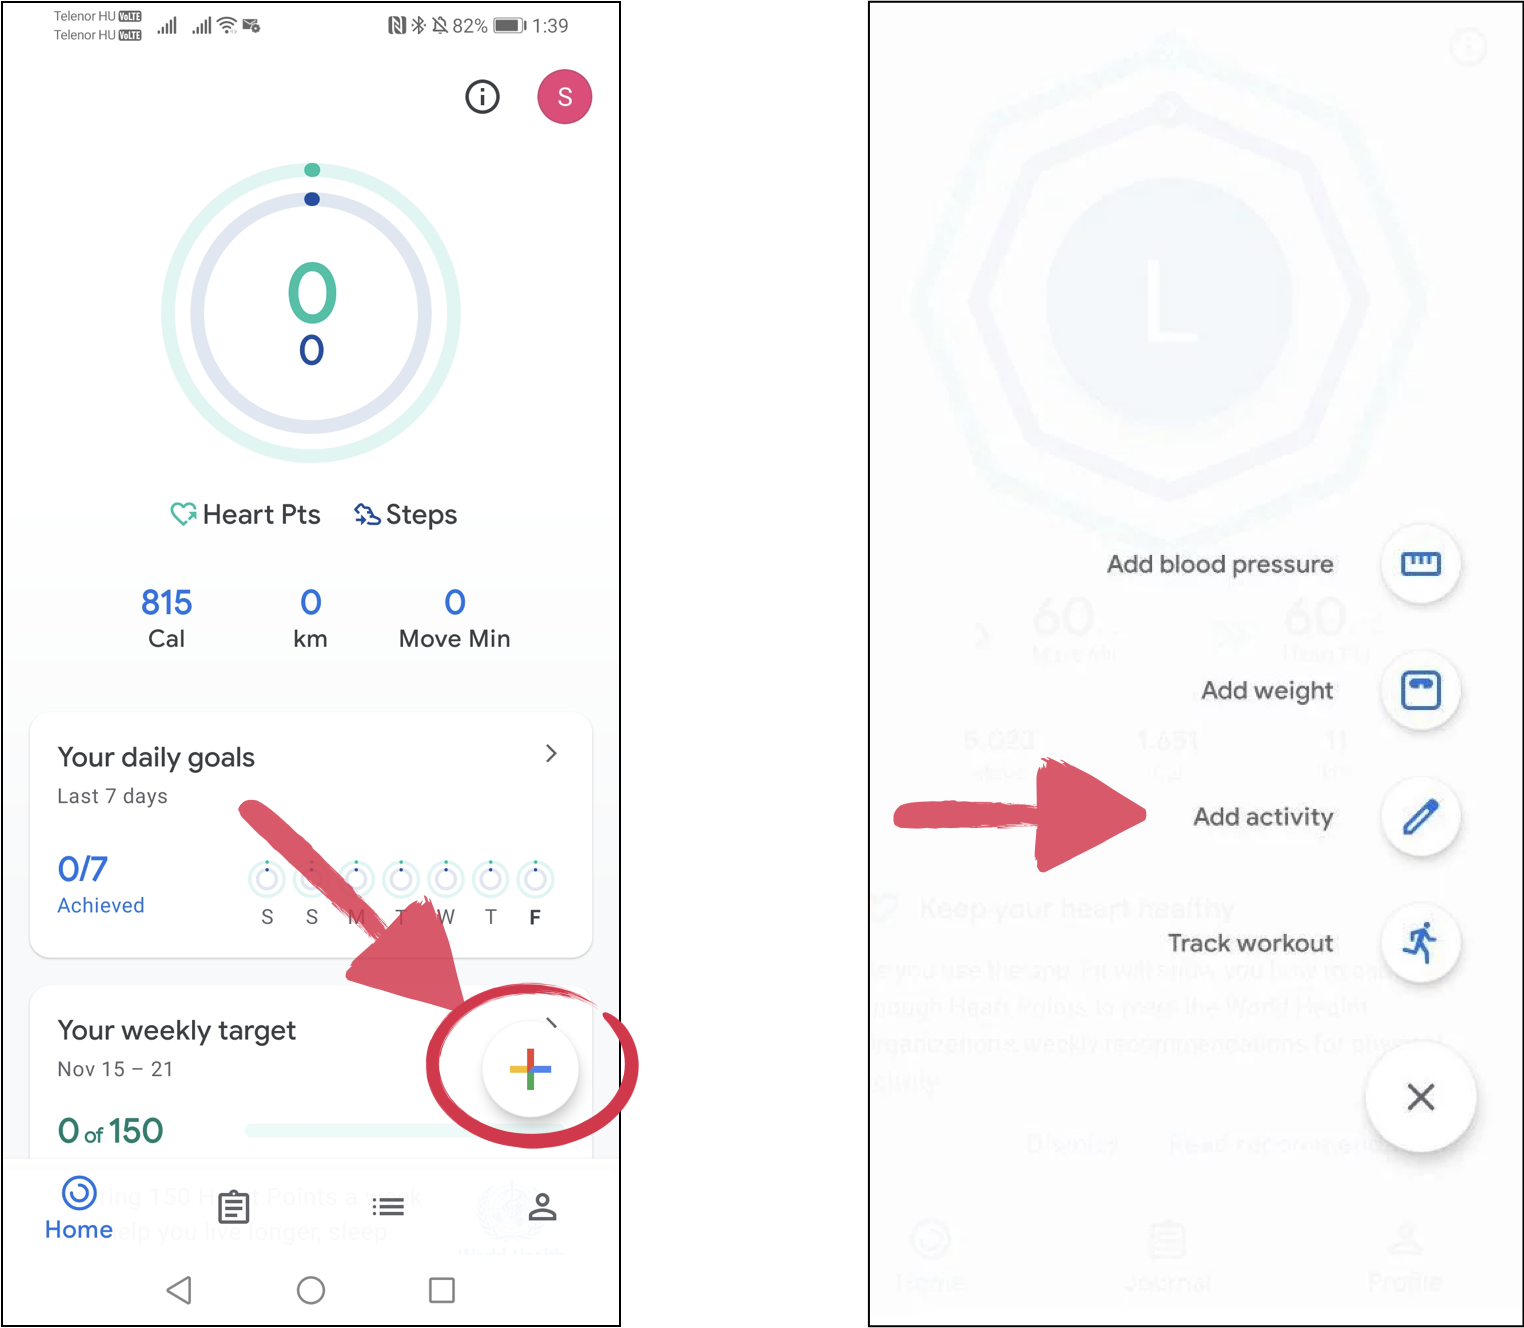 plus icon and add activity icon for Google Fit app